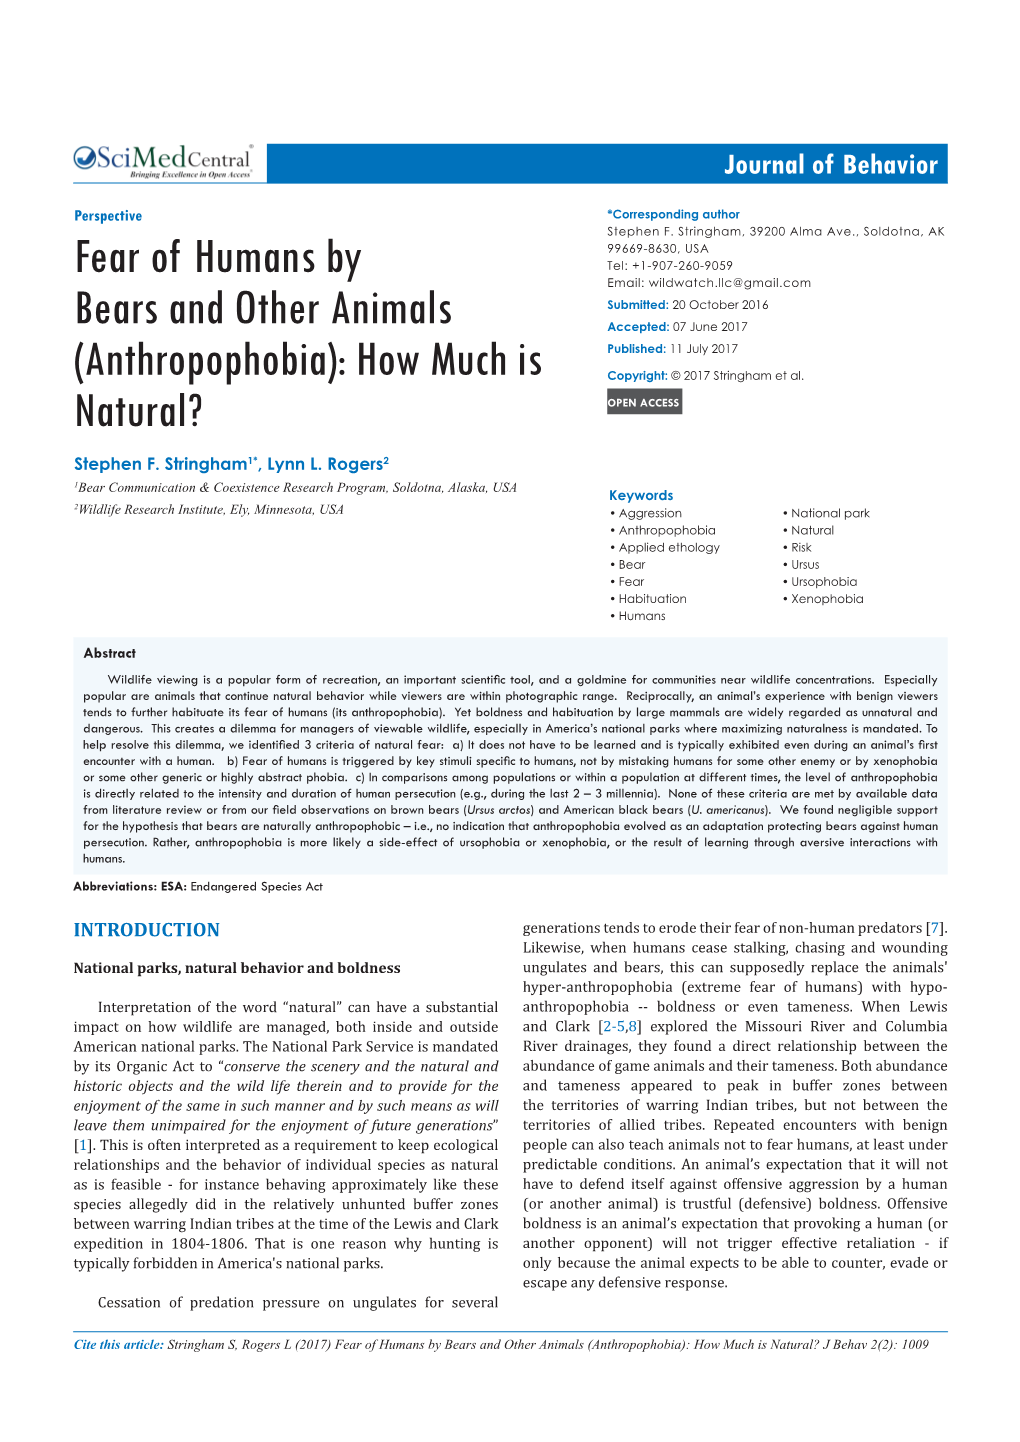 Fear of Humans by Bears and Other Animals (Anthropophobia): How Much Is Natural? J Behav 2(2): 1009 Stringham Et Al